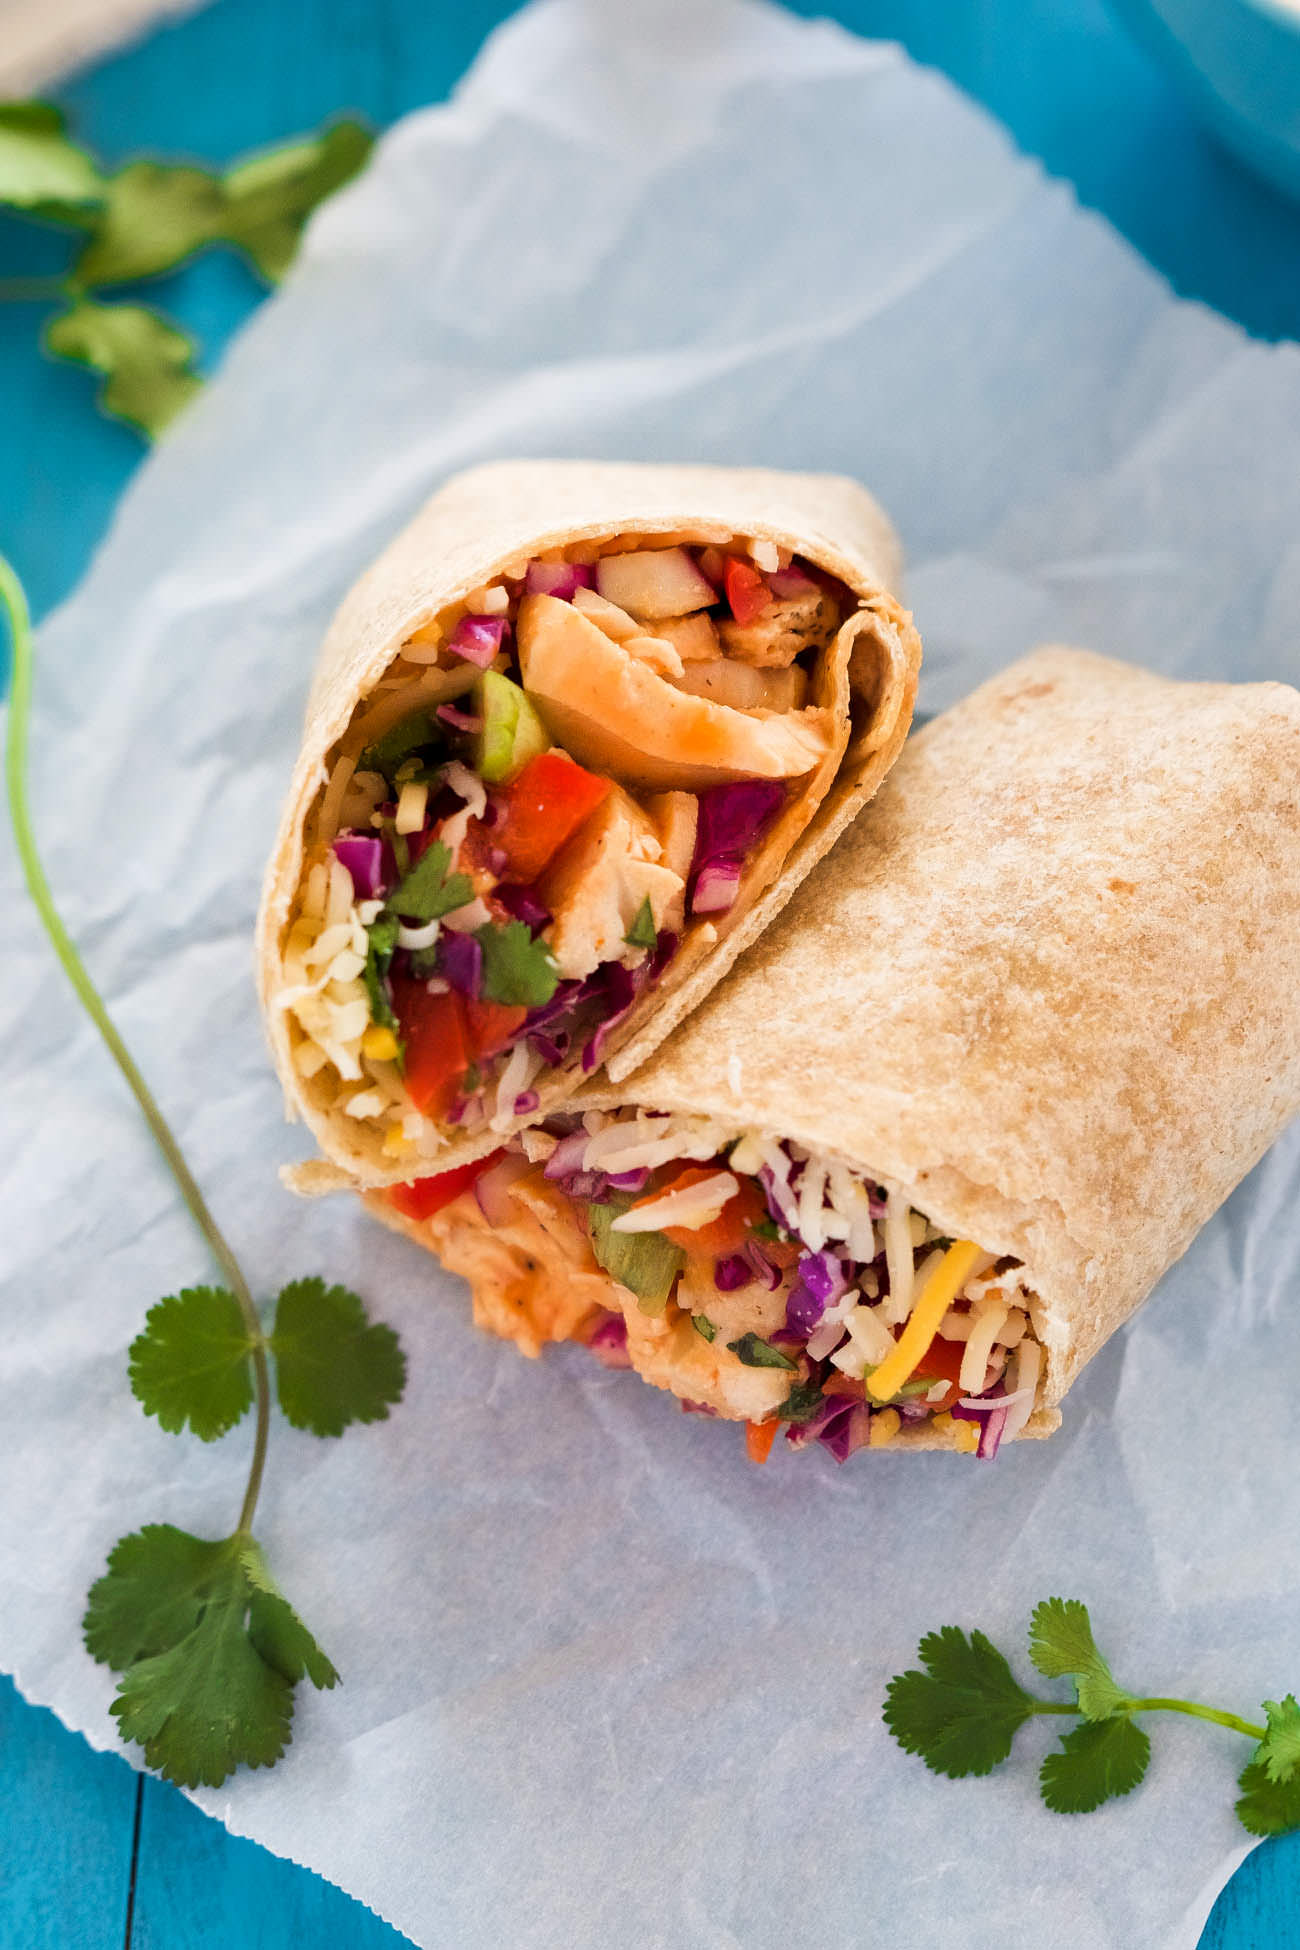 These Hot & Spicy Thai Chicken Wraps is the perfect quick dinner or lunch! Filled with a spicy thai slaw, grilled chicken, pepper jack cheese and drizzled with an addicting Sriracha honey aioli!